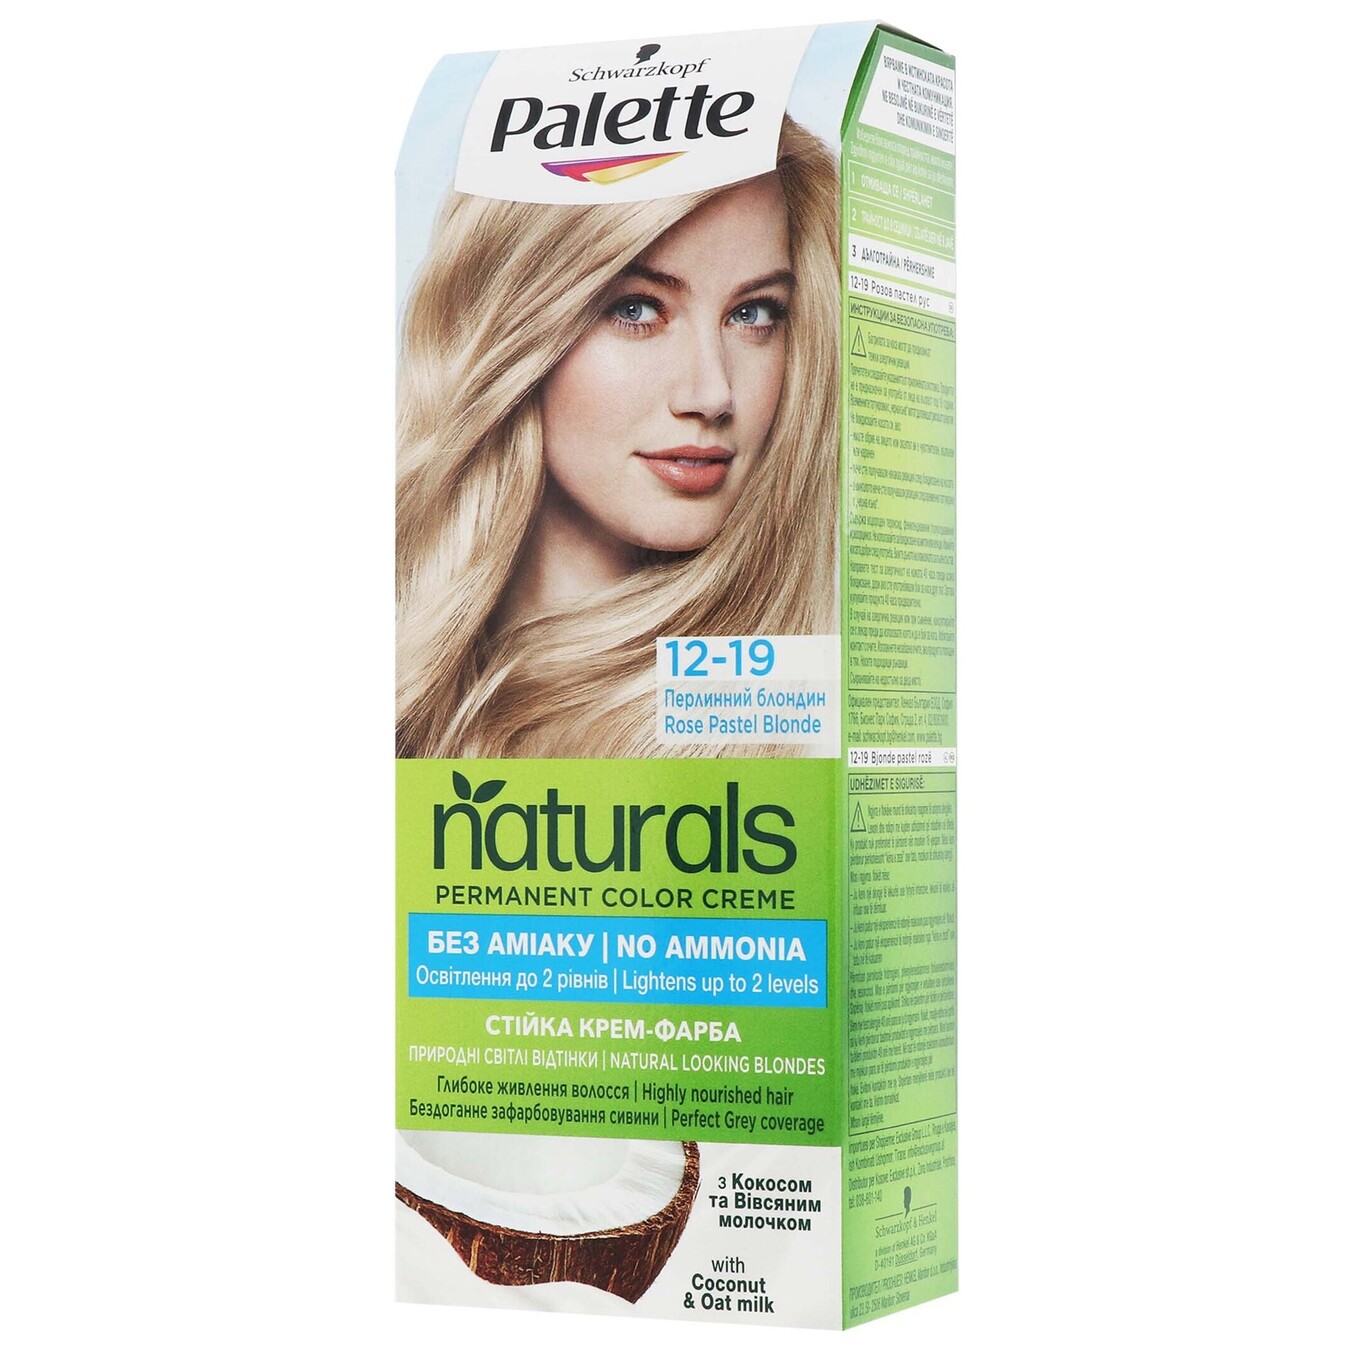 Cream-dye Palette Naturals 12-19 Pearl blonde without ammonia permanent hair color 110ml 2